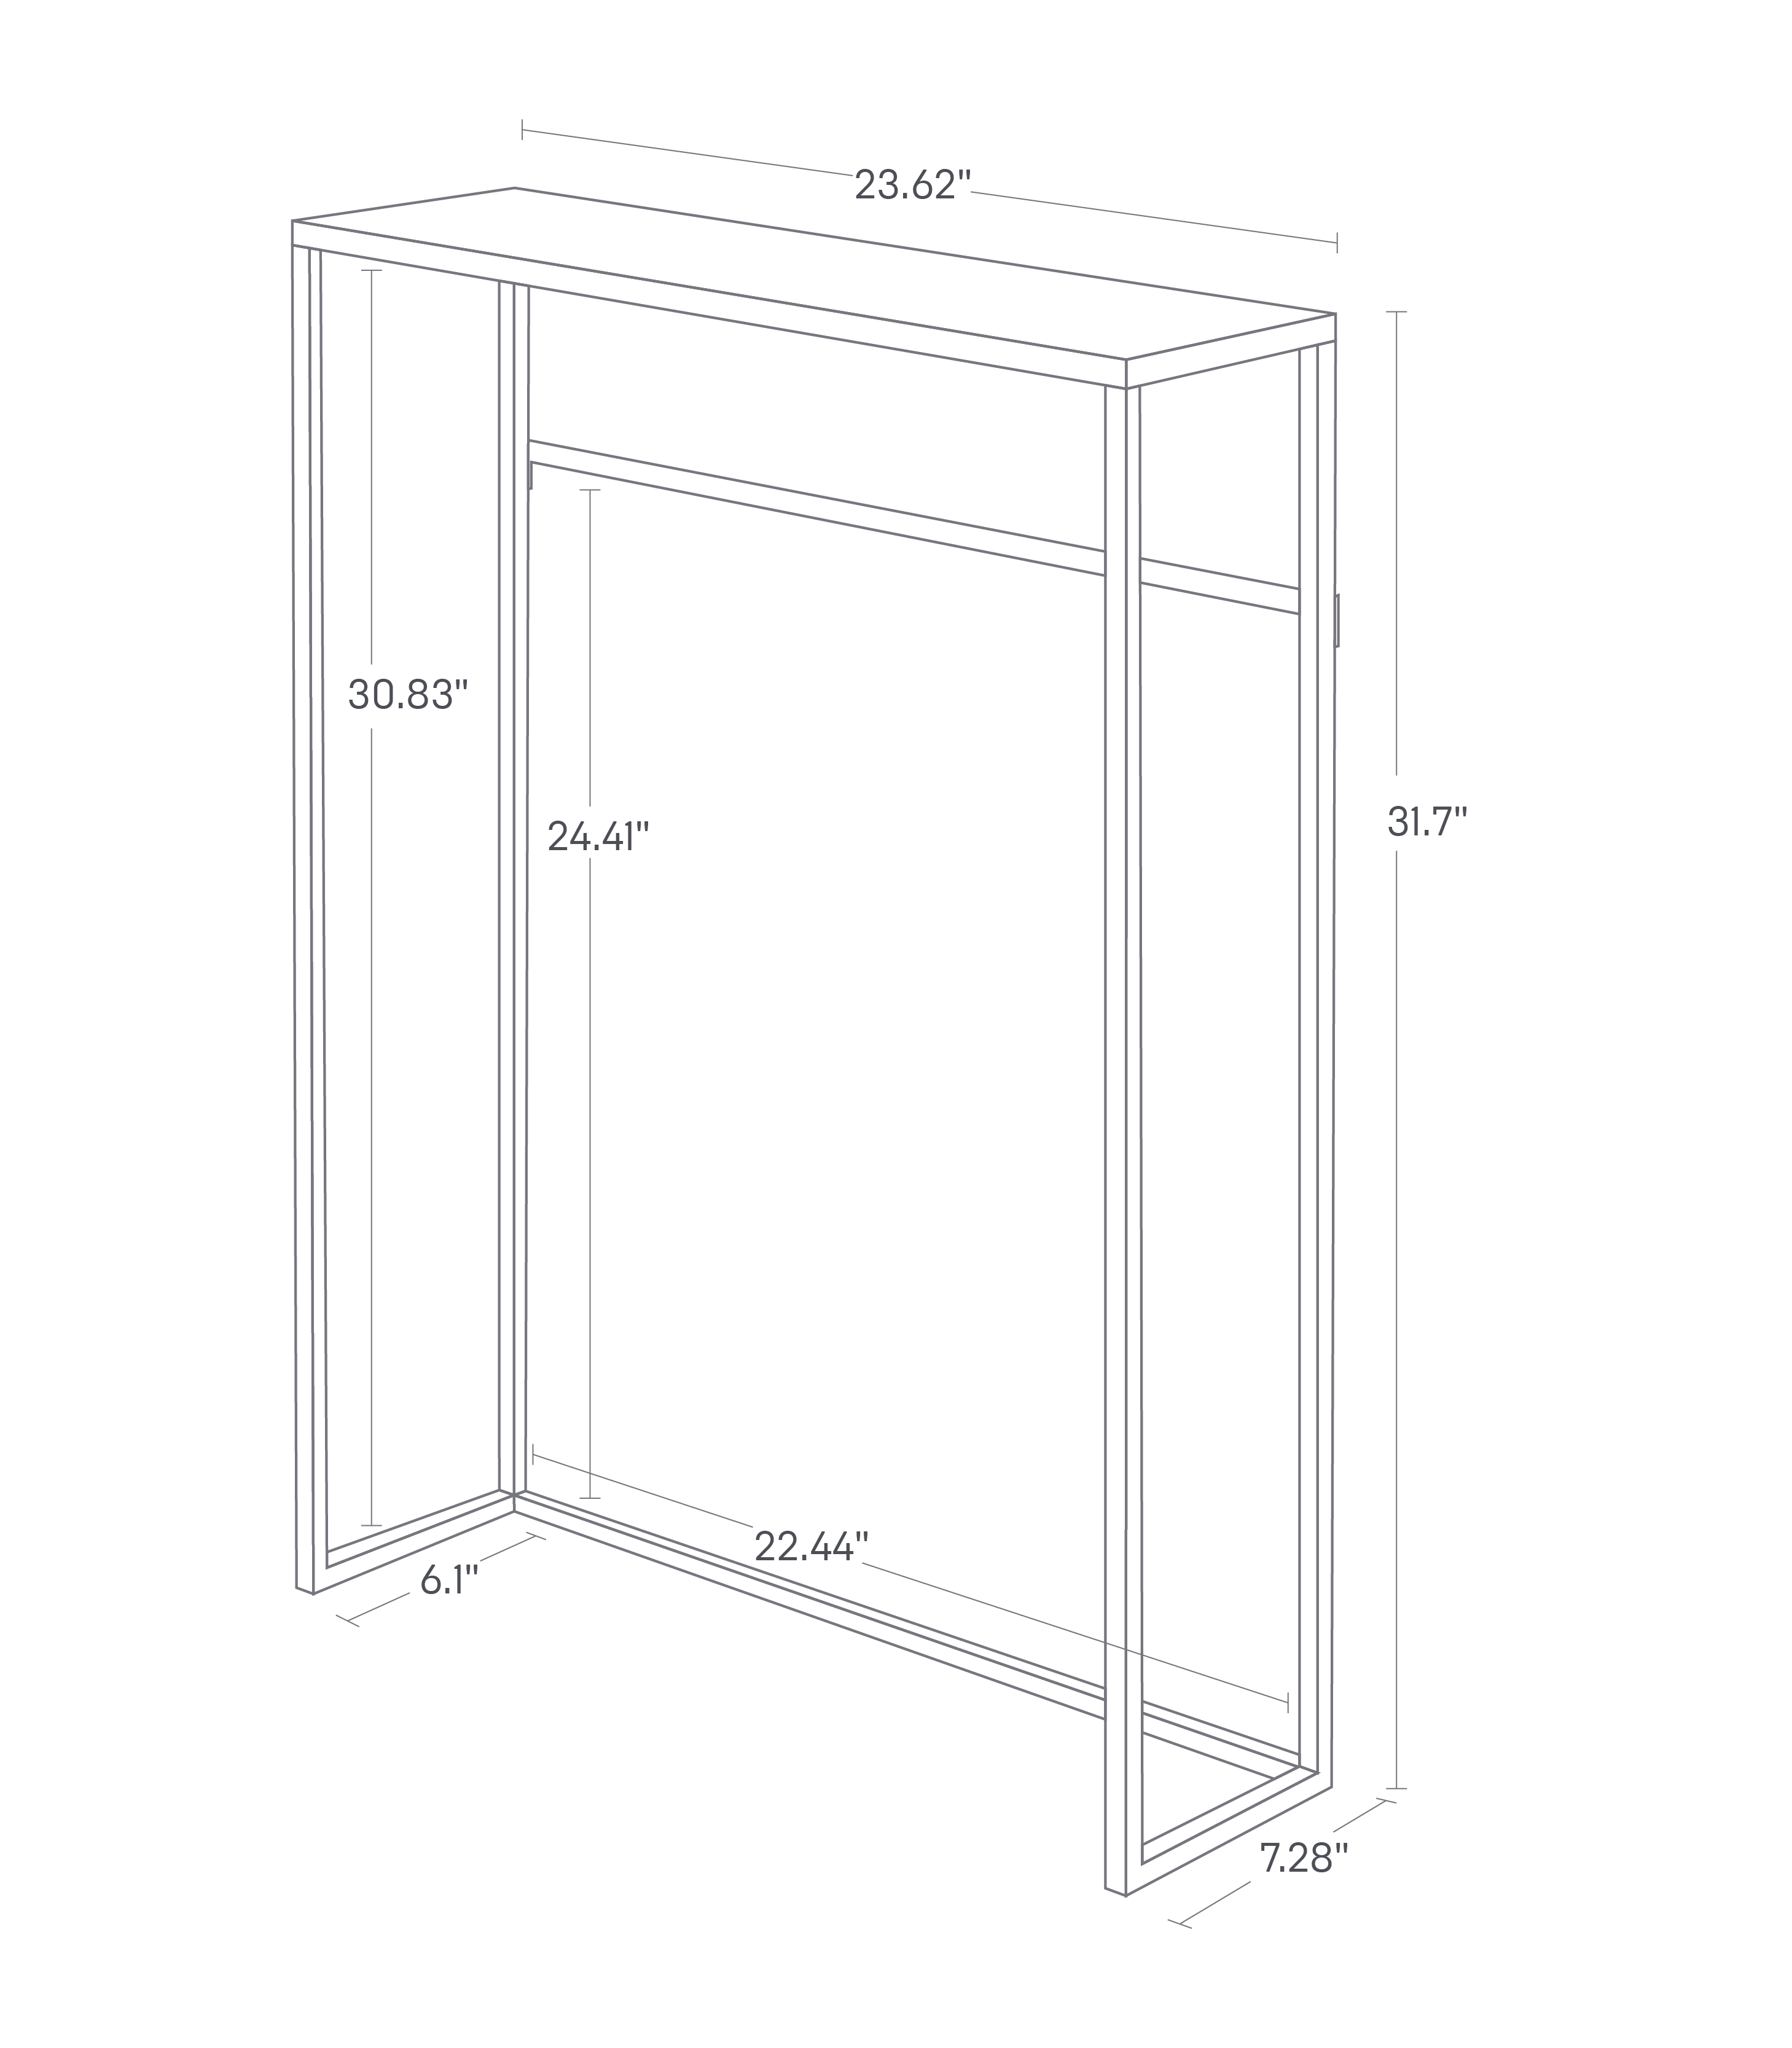 Dimension image for Narrow Entryway Console Table showing a total height of 31.7